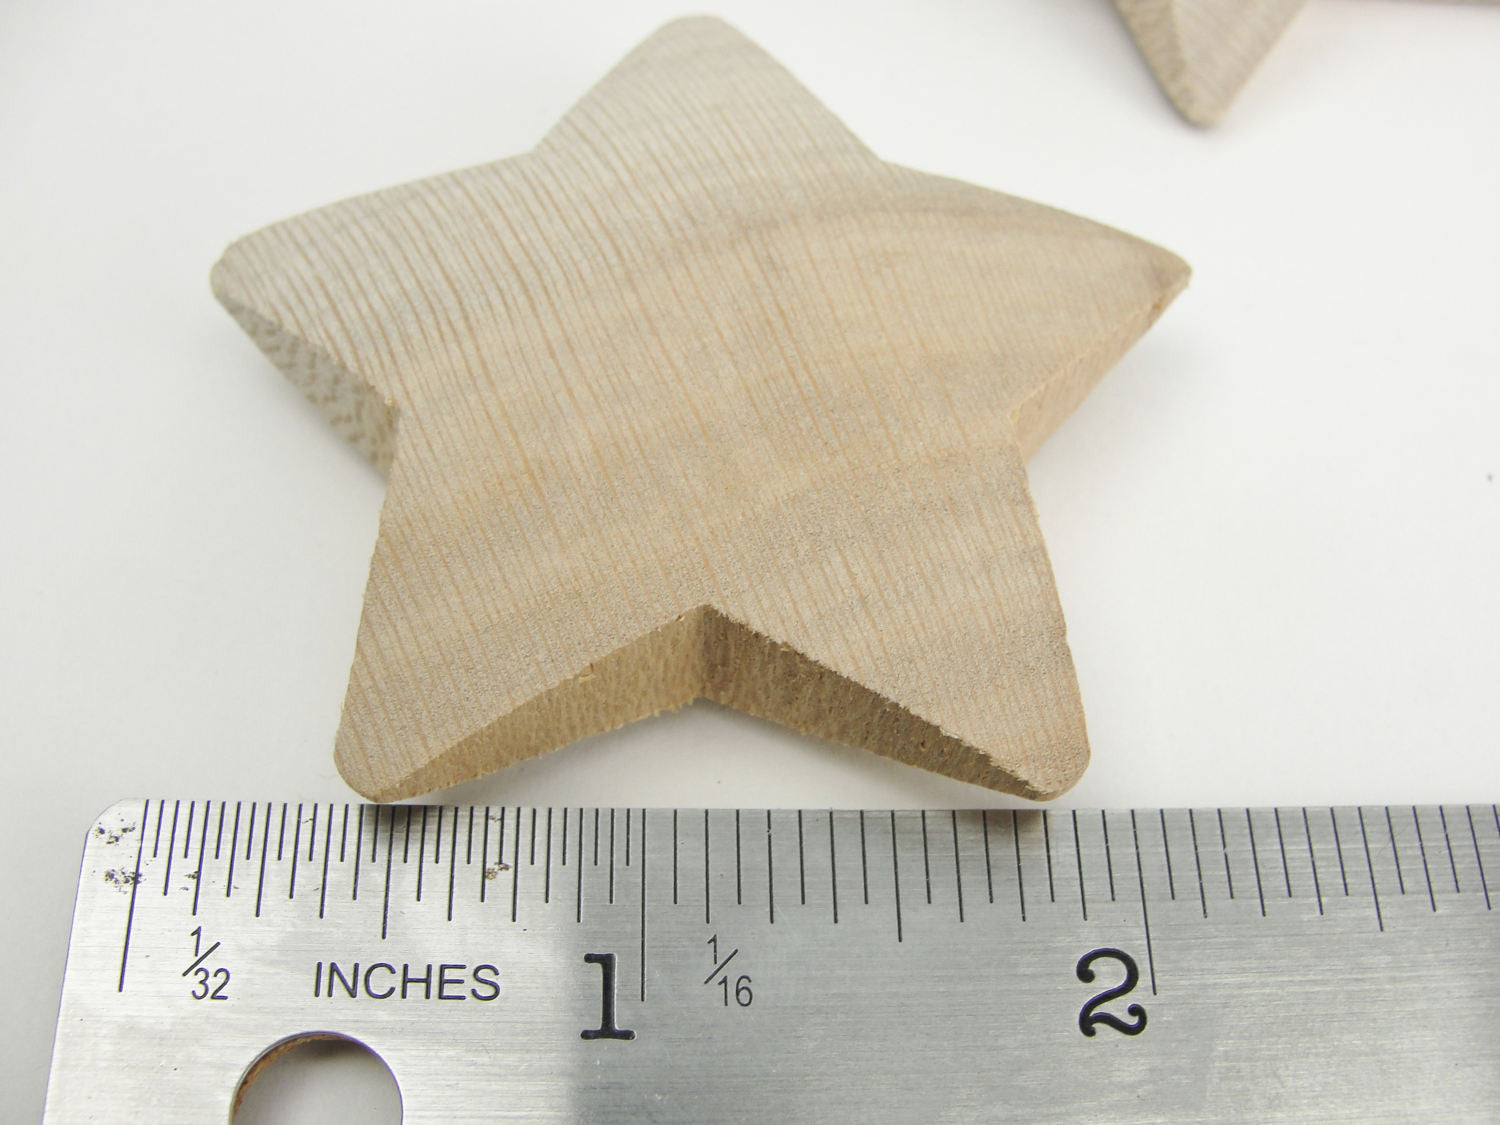 6 Wooden puffy Stars 2 1/4" - Wood parts - Craft Supply House